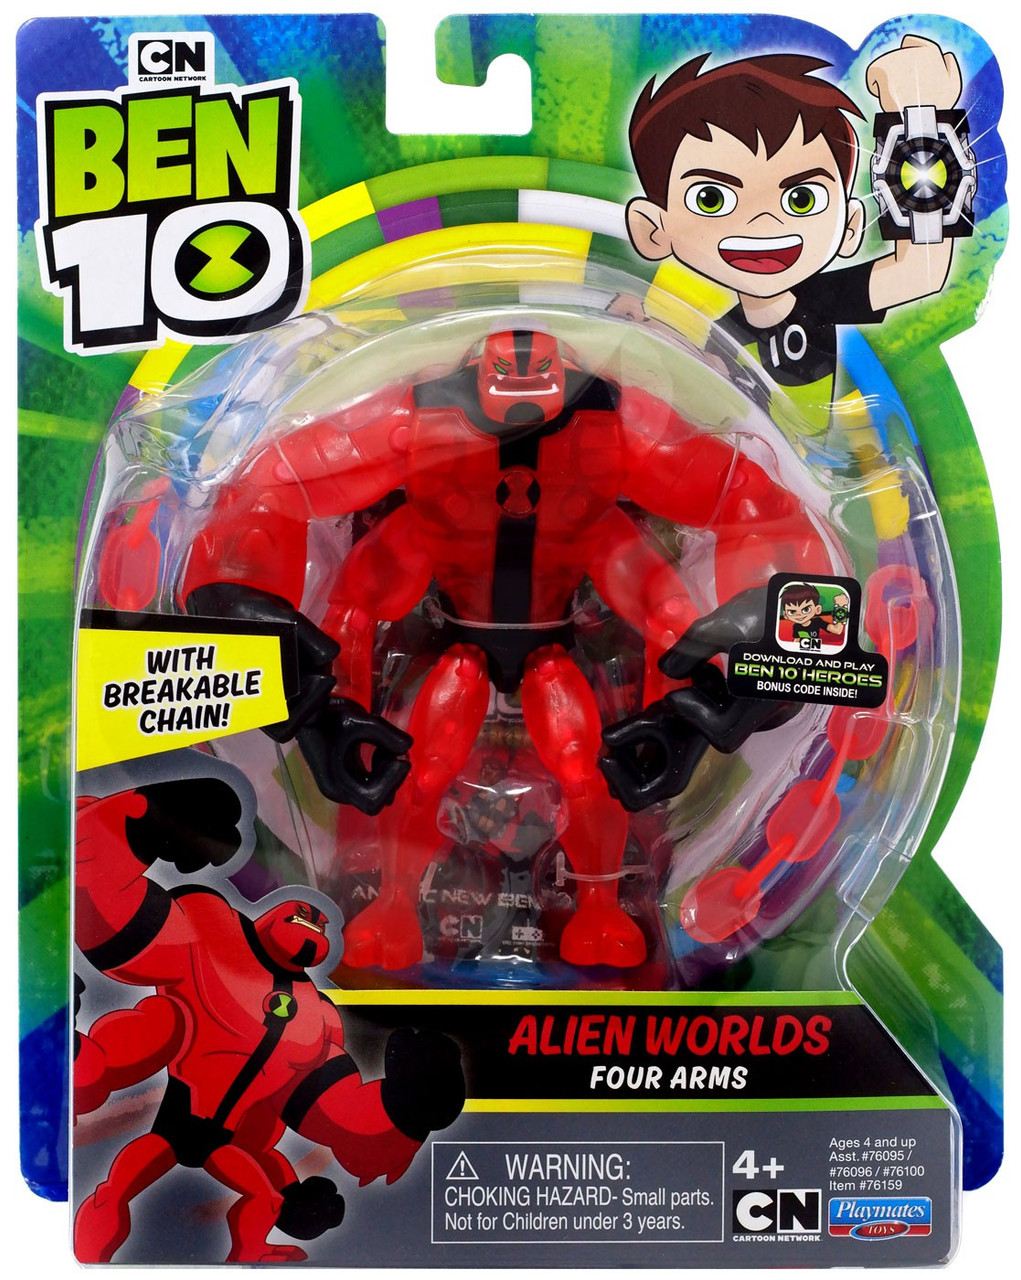 Ben 10 Alien Worlds Four Arms 5 Action Figure Breakable Chain Playmates Toywiz - four arms roblox